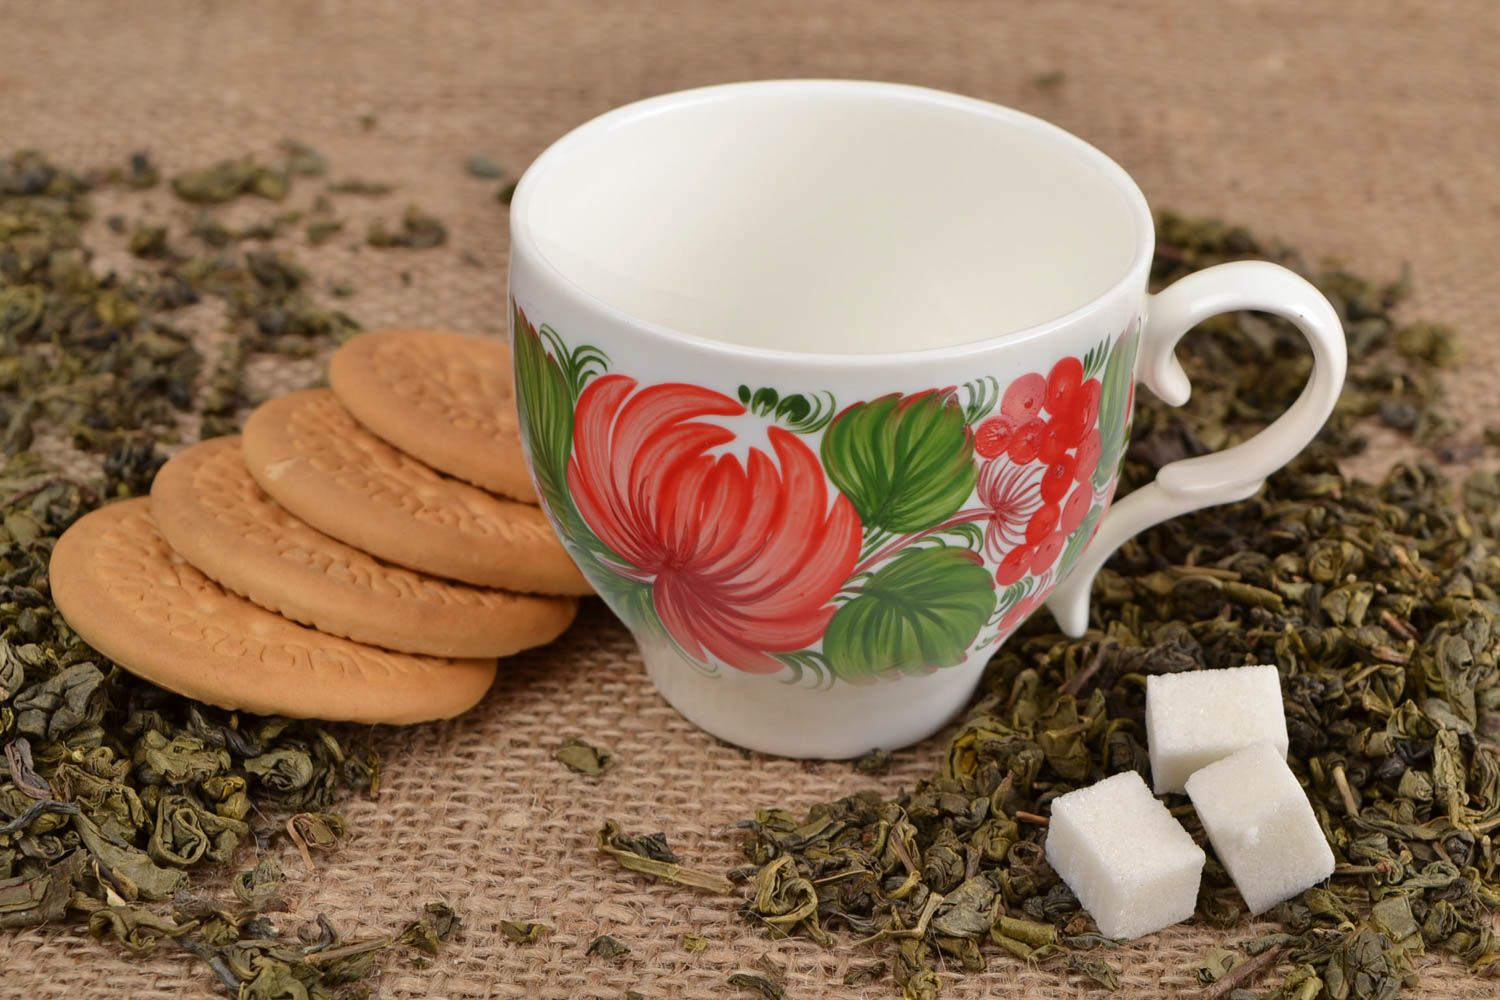 8 oz ceramic porcelain cup in white, red, and green color with handle and Russian style pattern photo 1